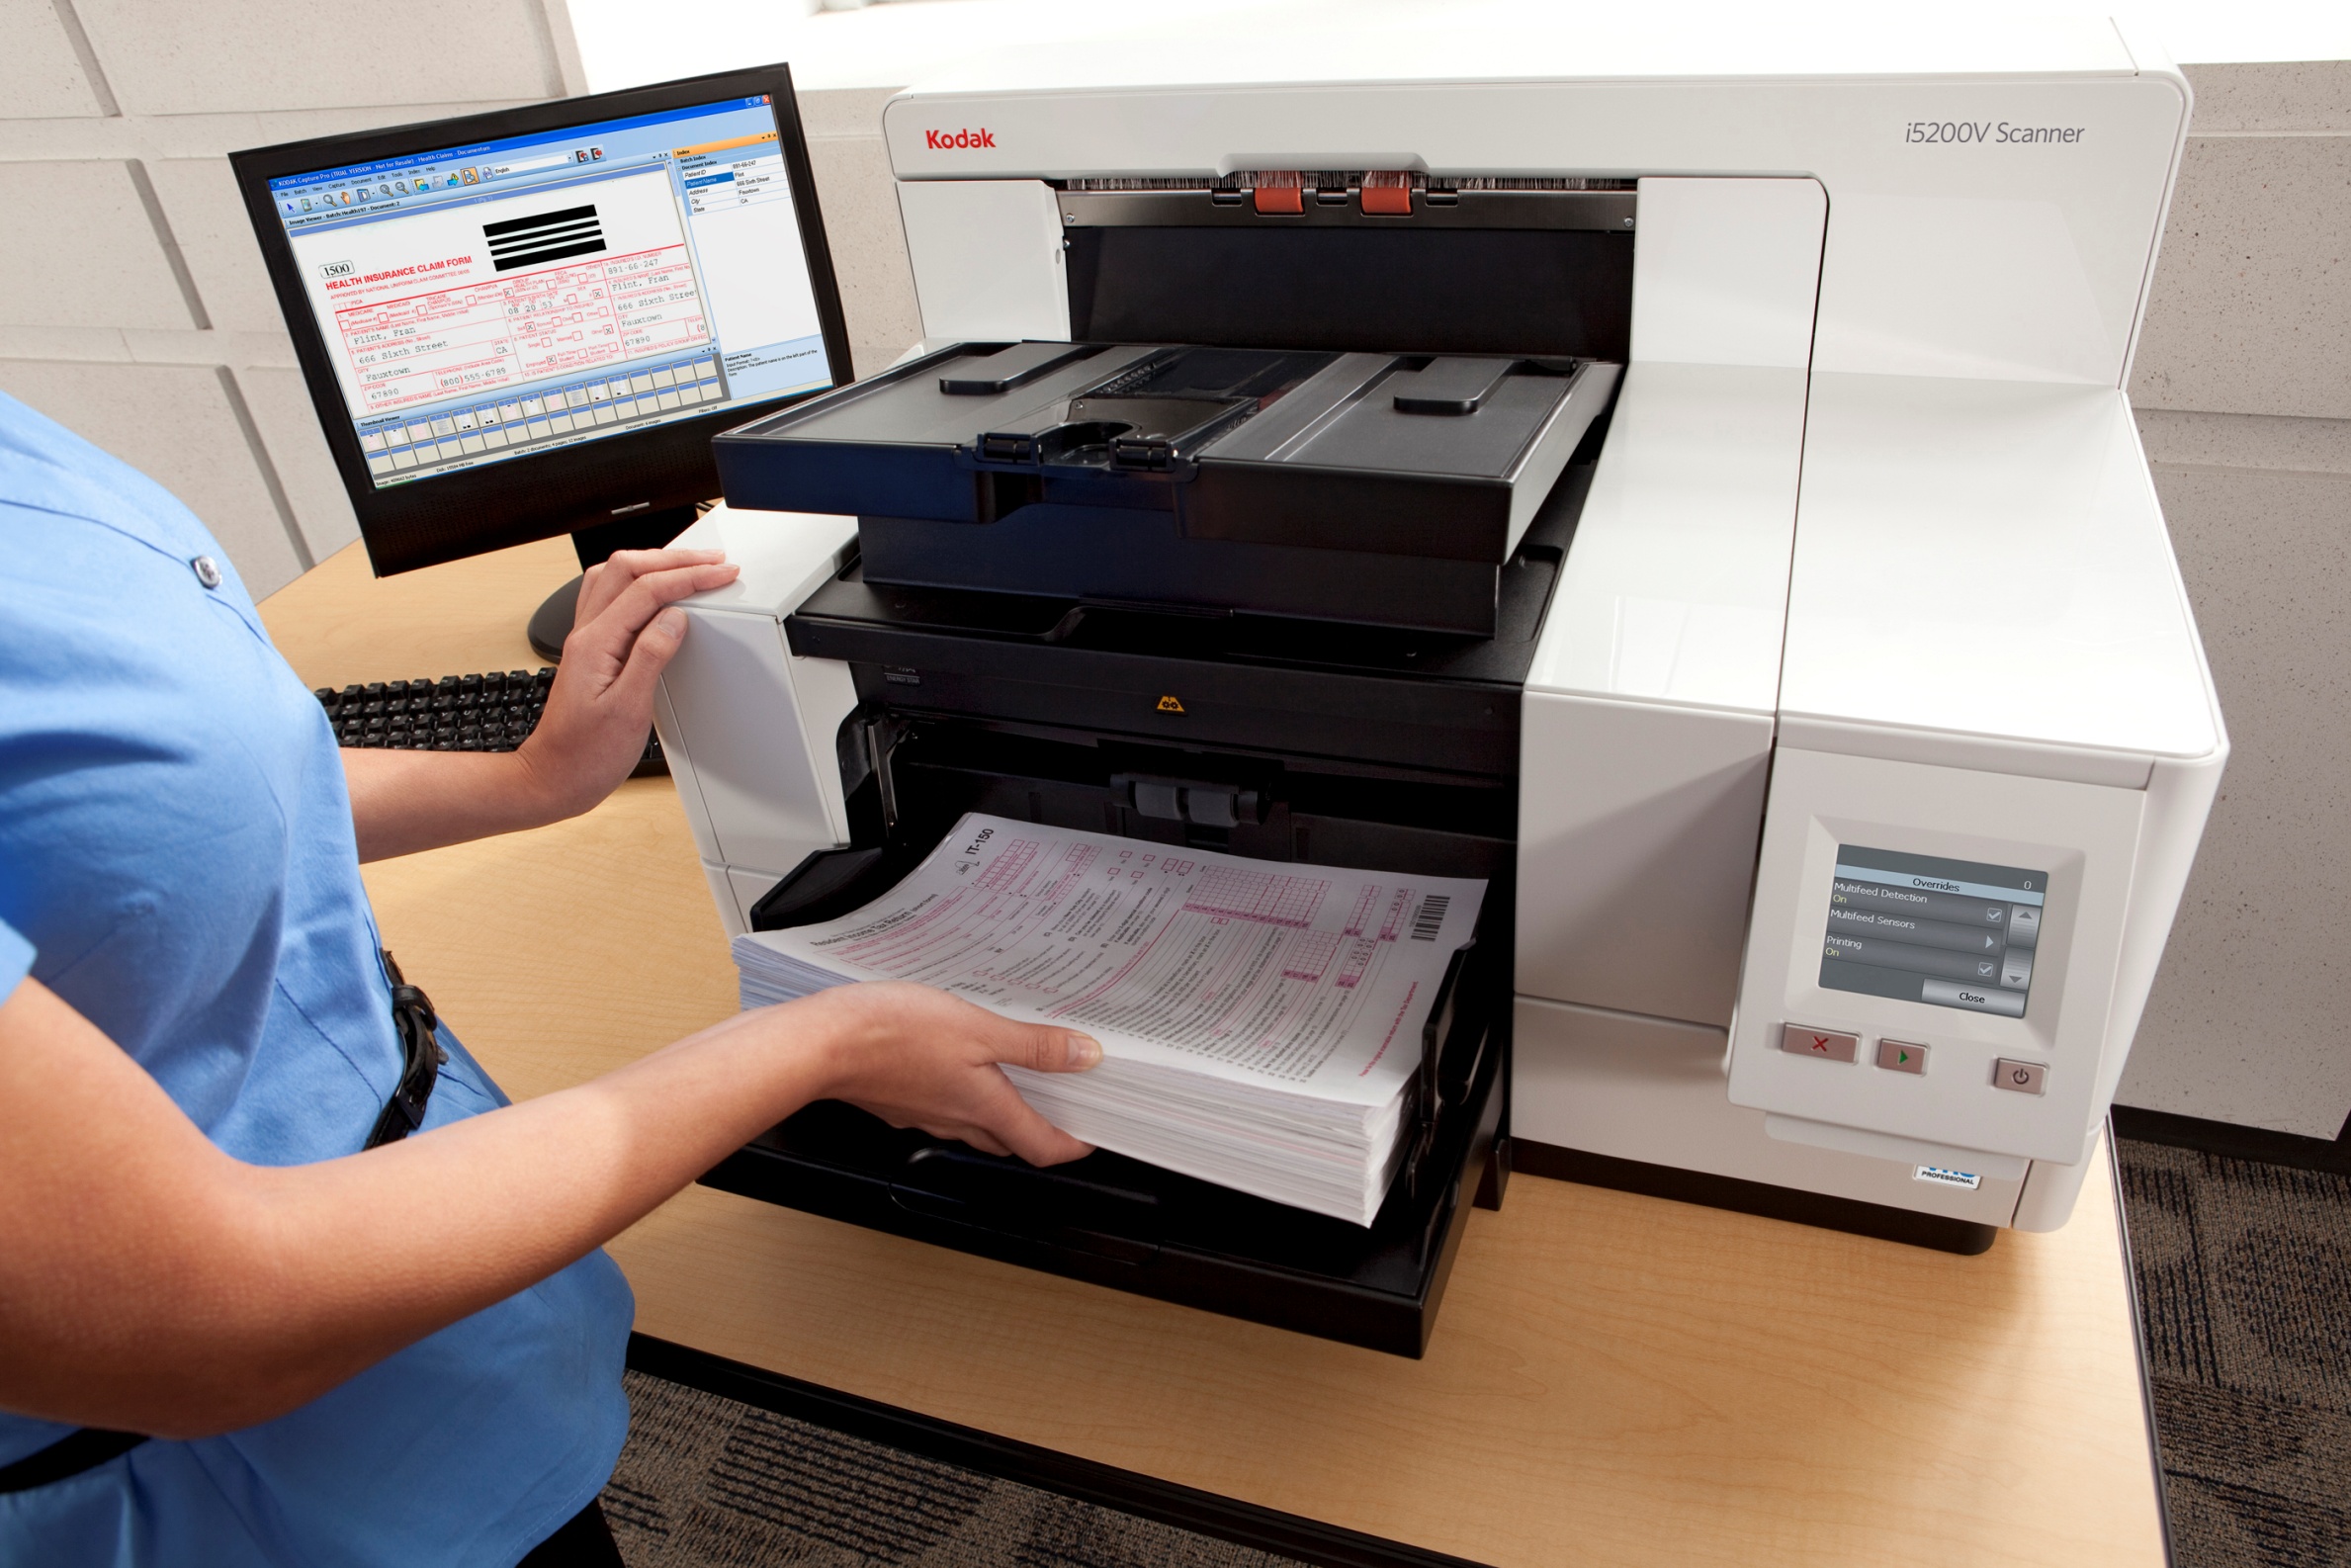 Kodak Production Scanning offered by Leppert Business Systems. Convert paper to digital easily